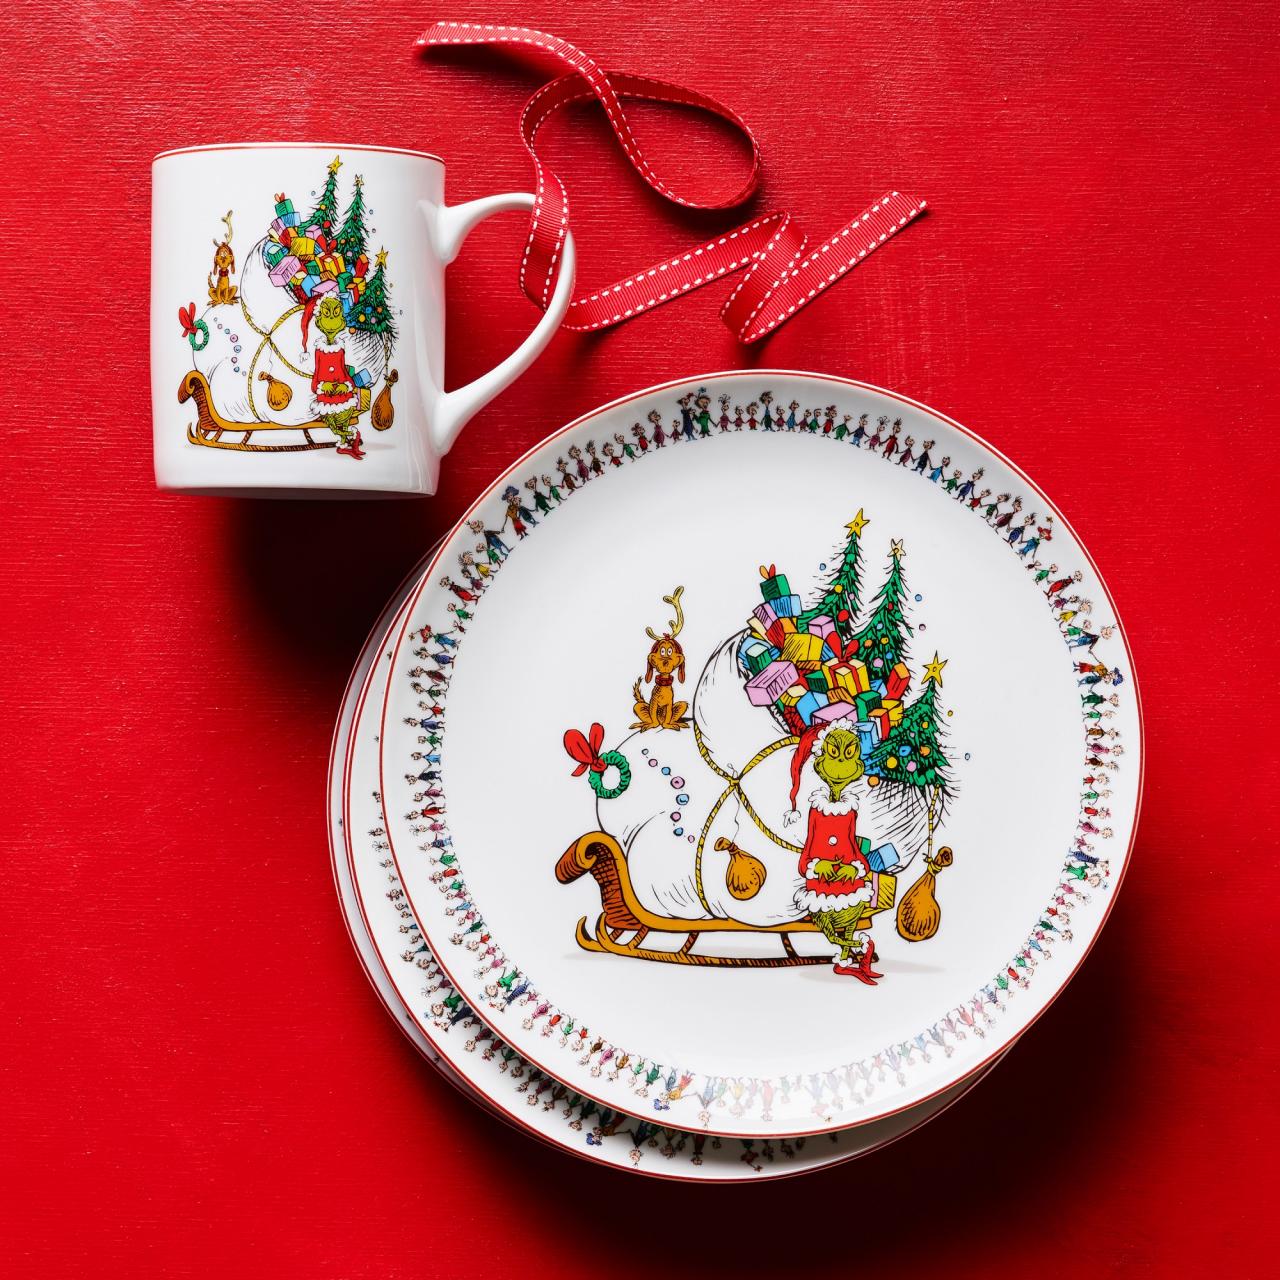 https://food.fnr.sndimg.com/content/dam/images/food/products/2023/11/9/rx_williamssonoma_the-grinch-dinnerware-collection.jpeg.rend.hgtvcom.1280.1280.suffix/1699552169501.jpeg